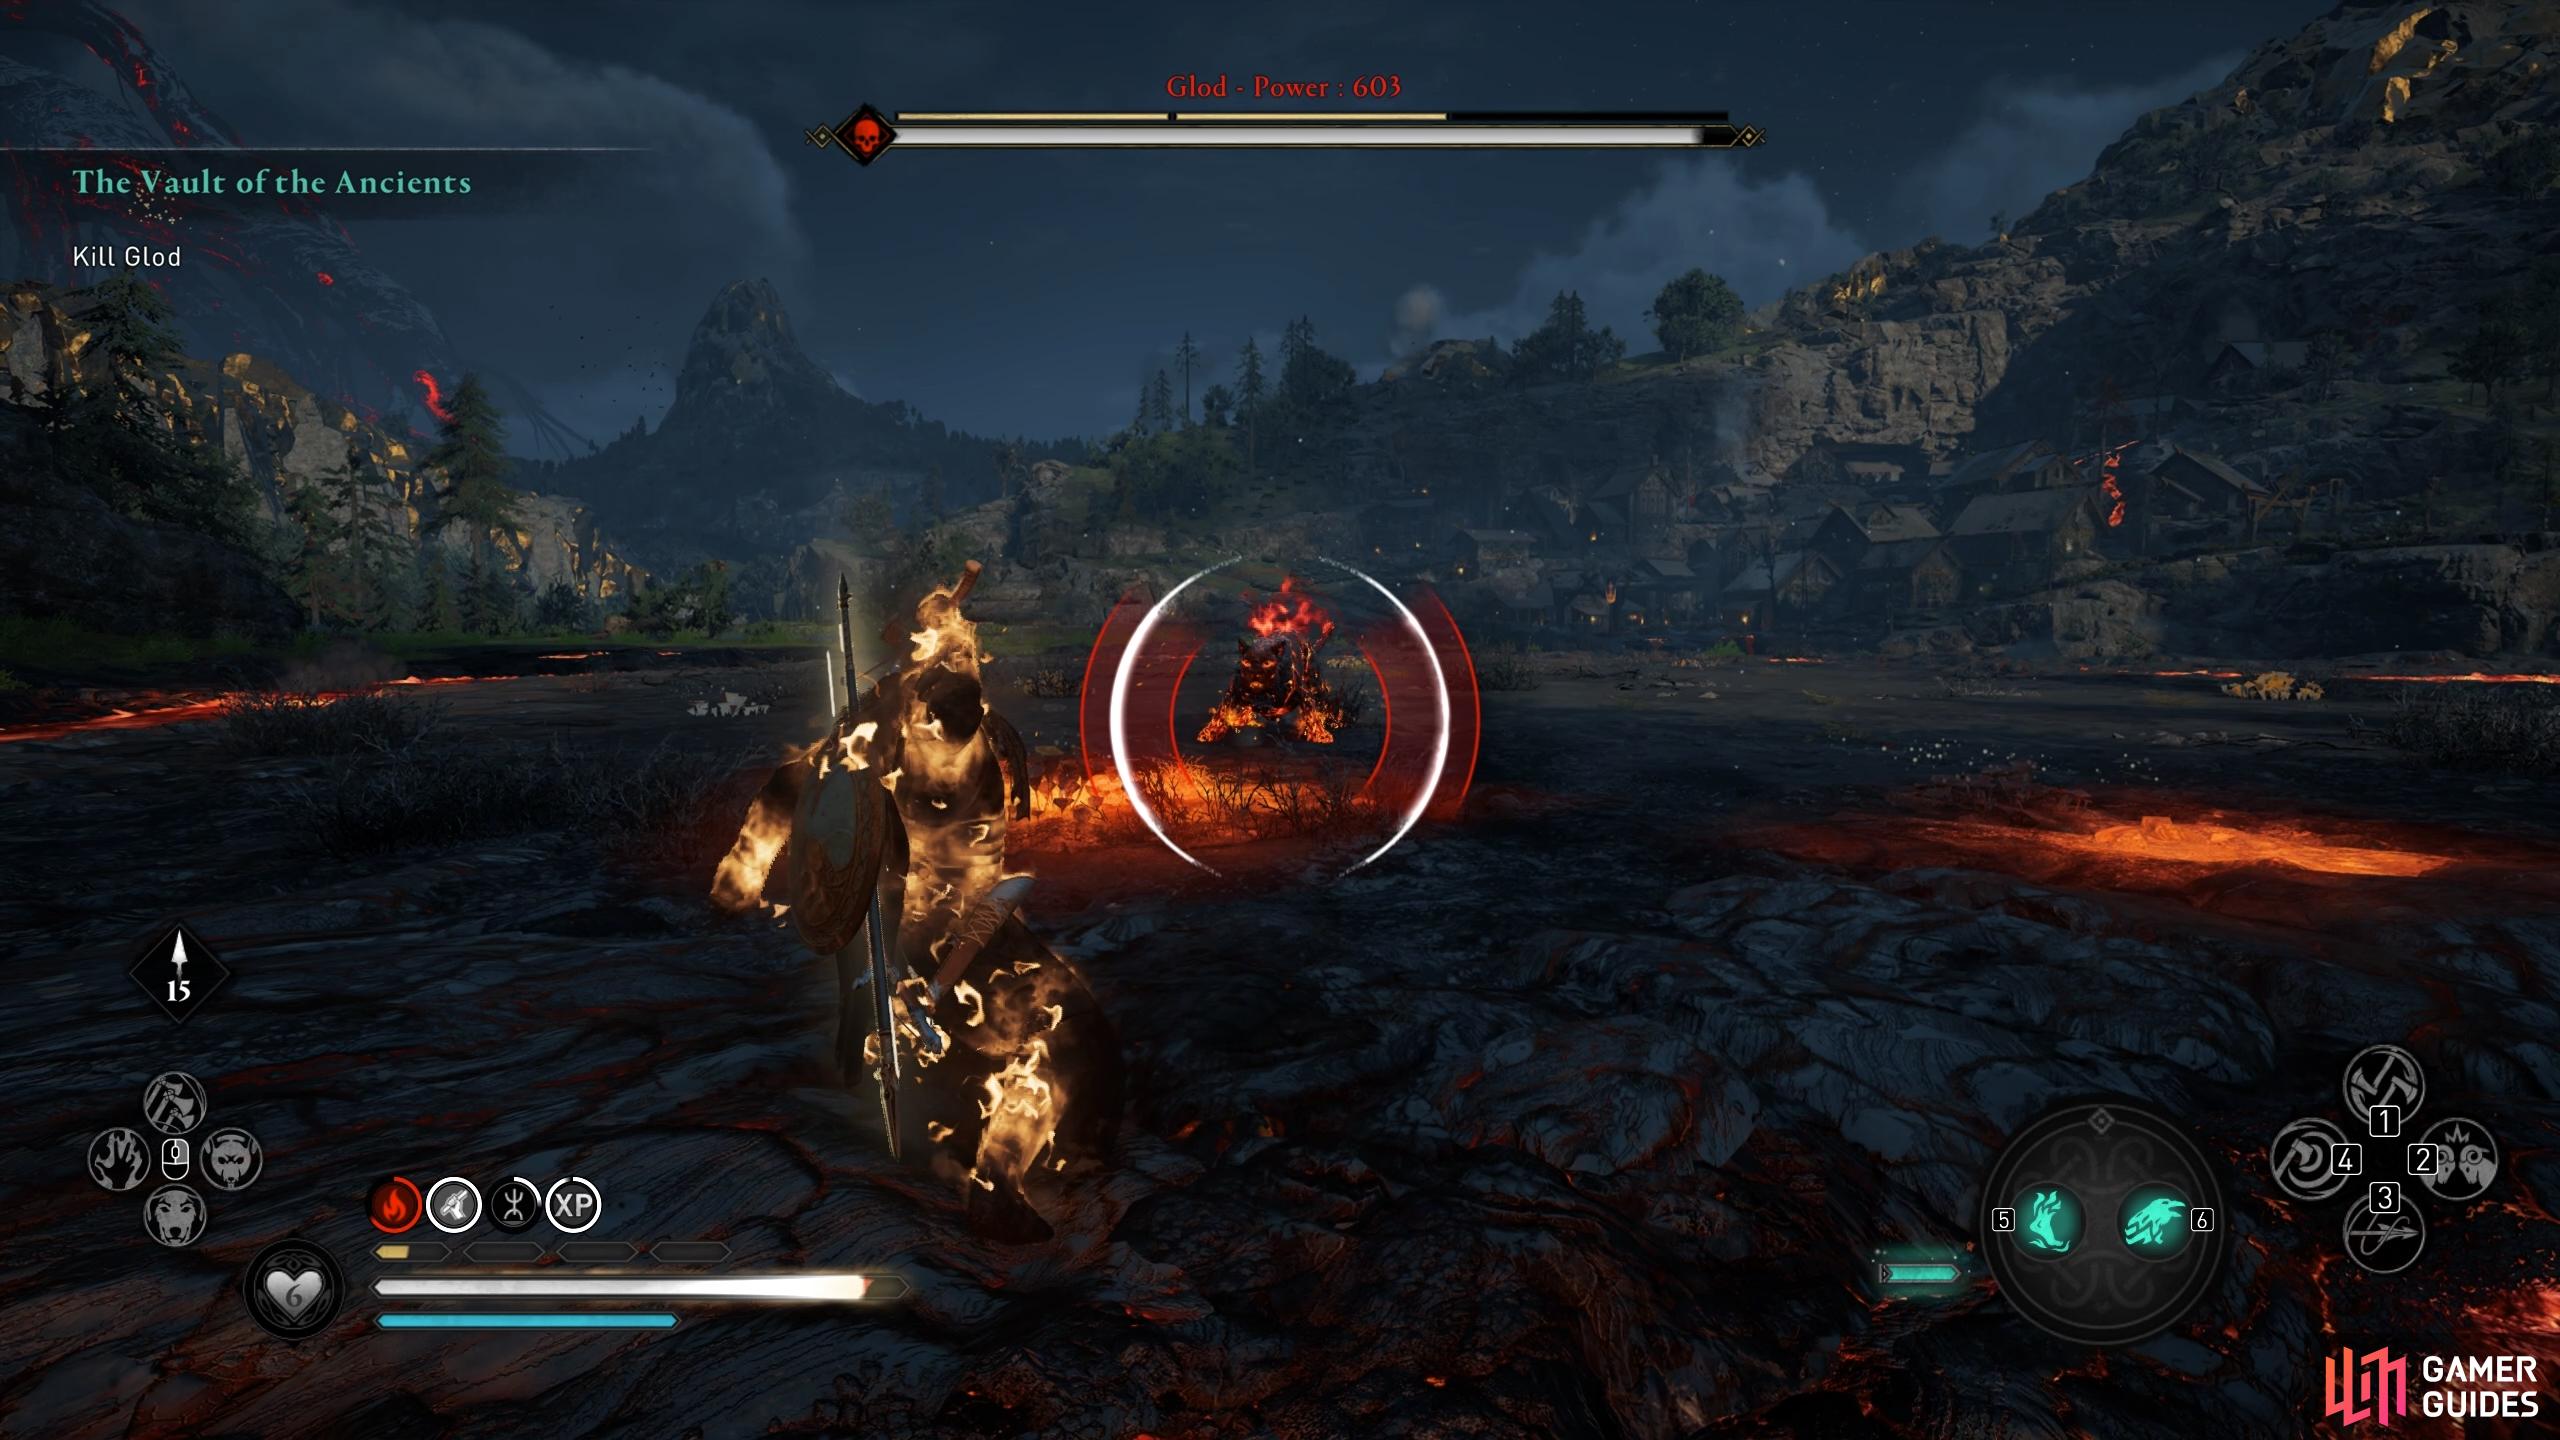 You'll need to use special abilities which target weak points, such as Precision Axe Throw, if you want to execute a stun attack early.